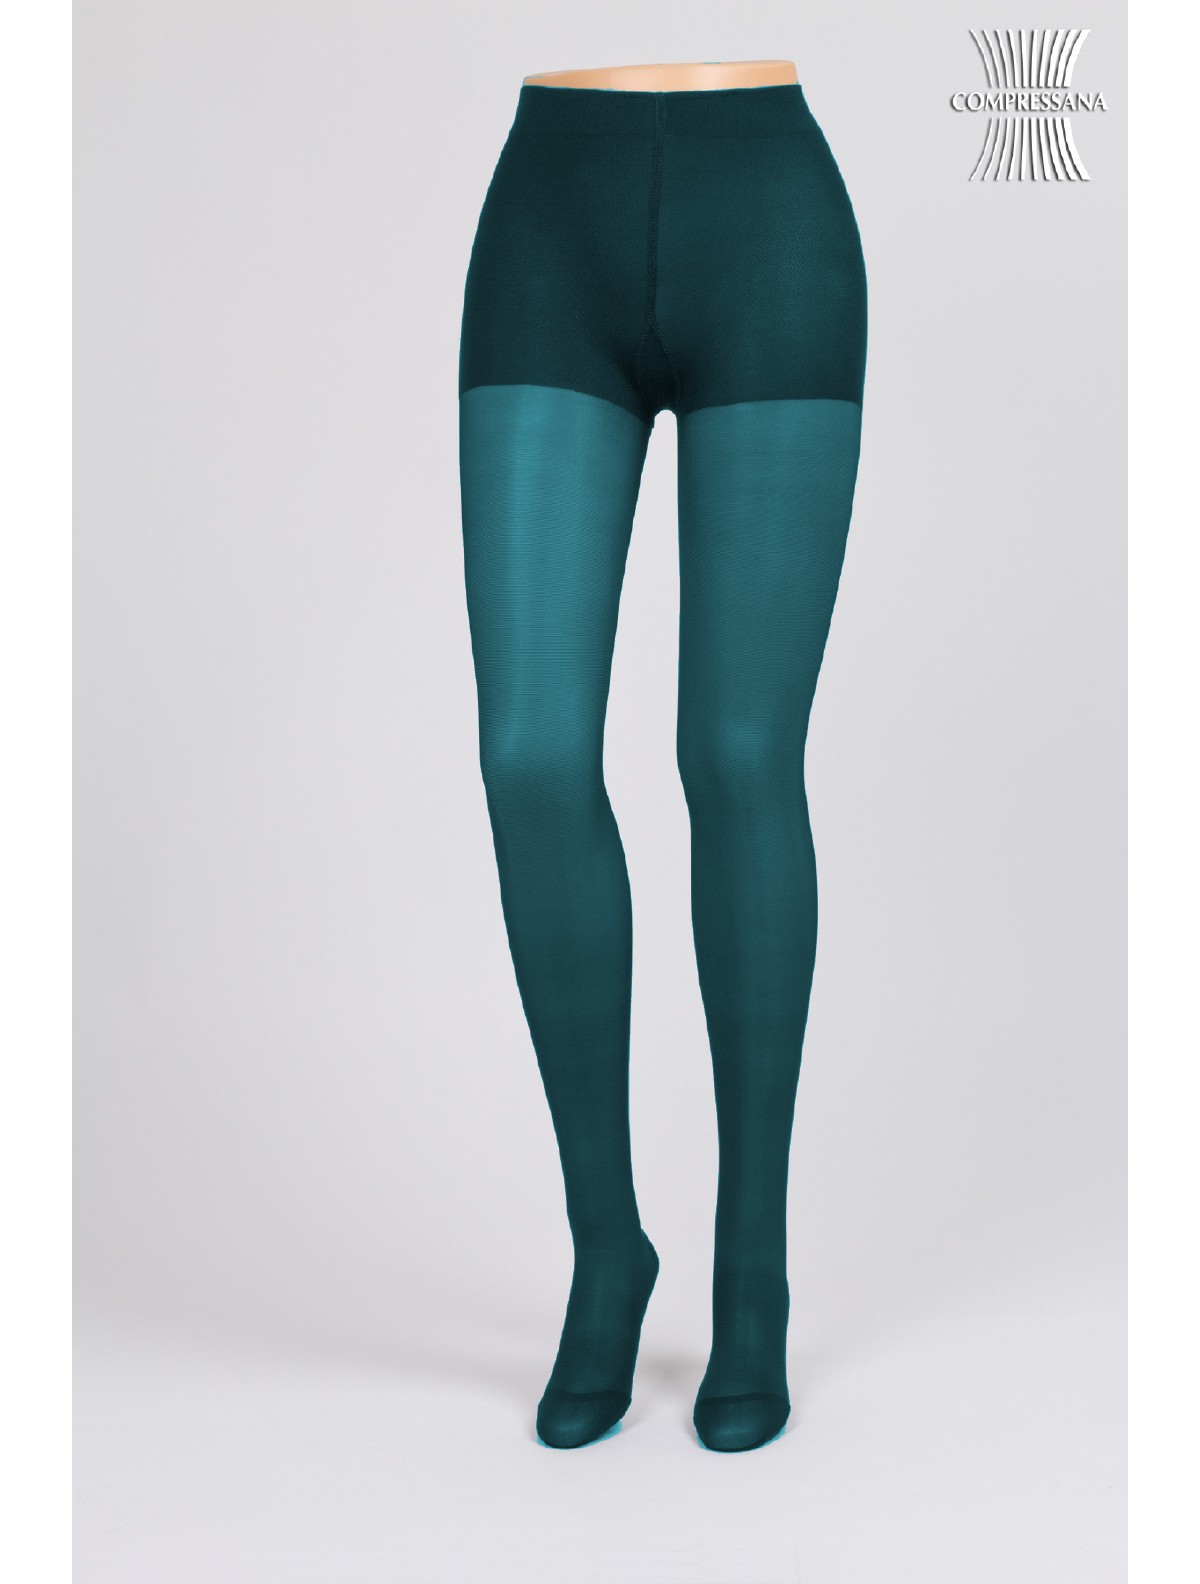 Compressana Calypso 140 Strong Support Tights